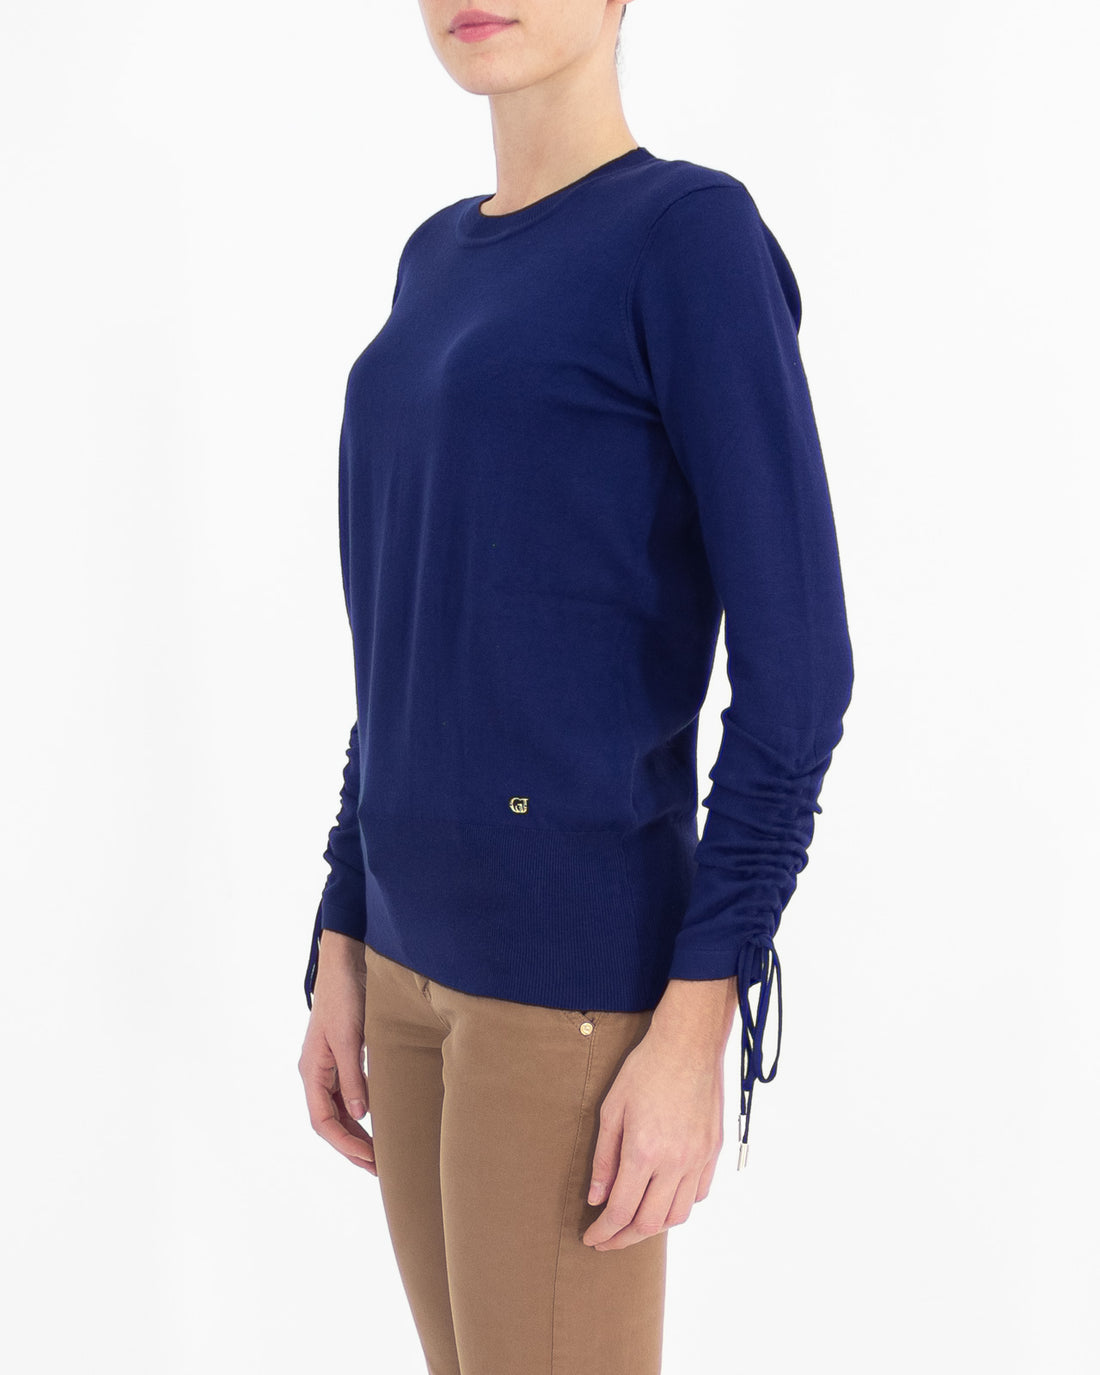 Viscose sweater with laces